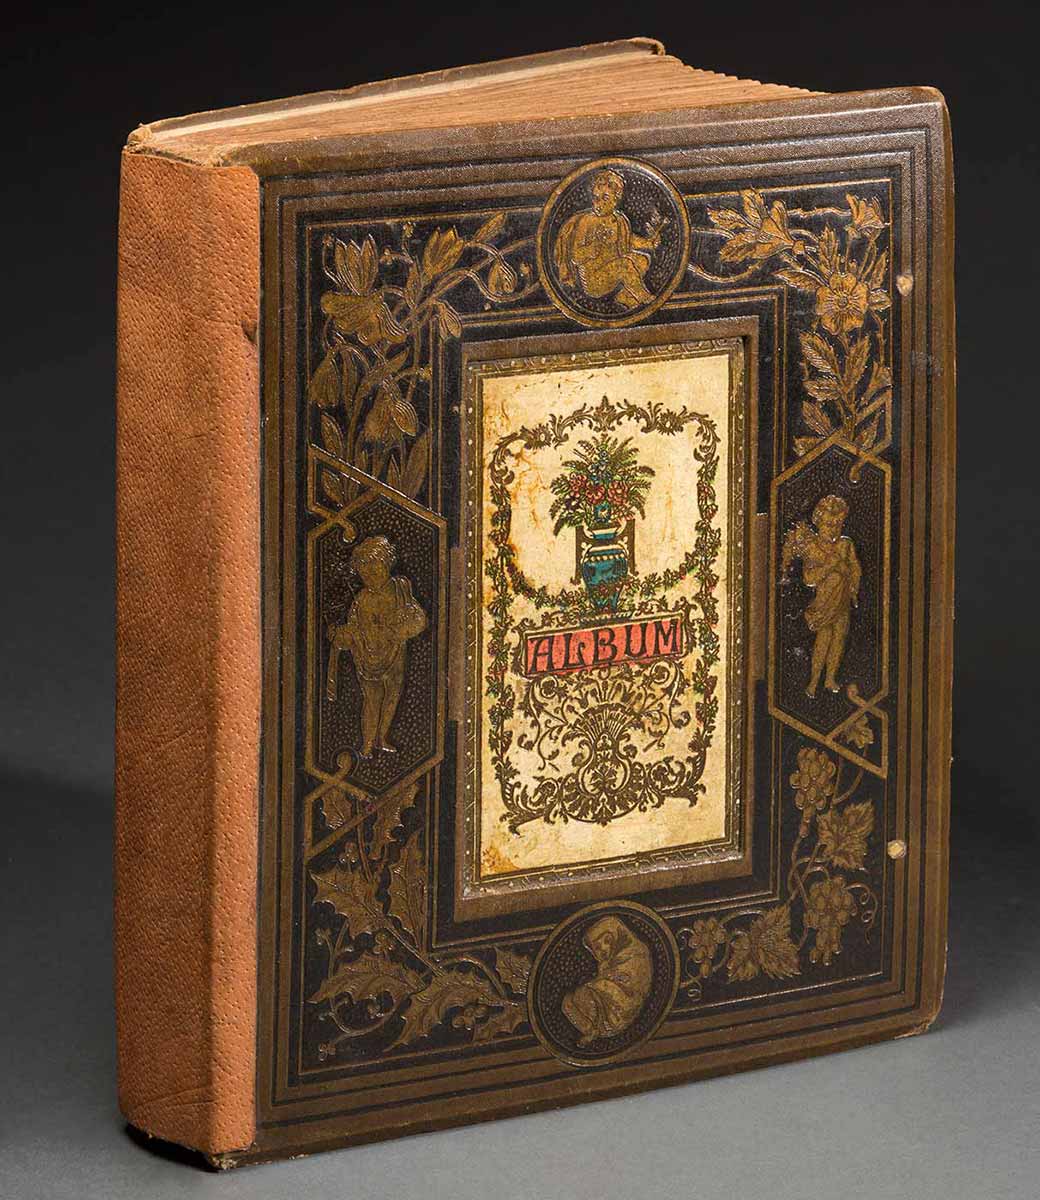 Album with ornate cover. - click to view larger image